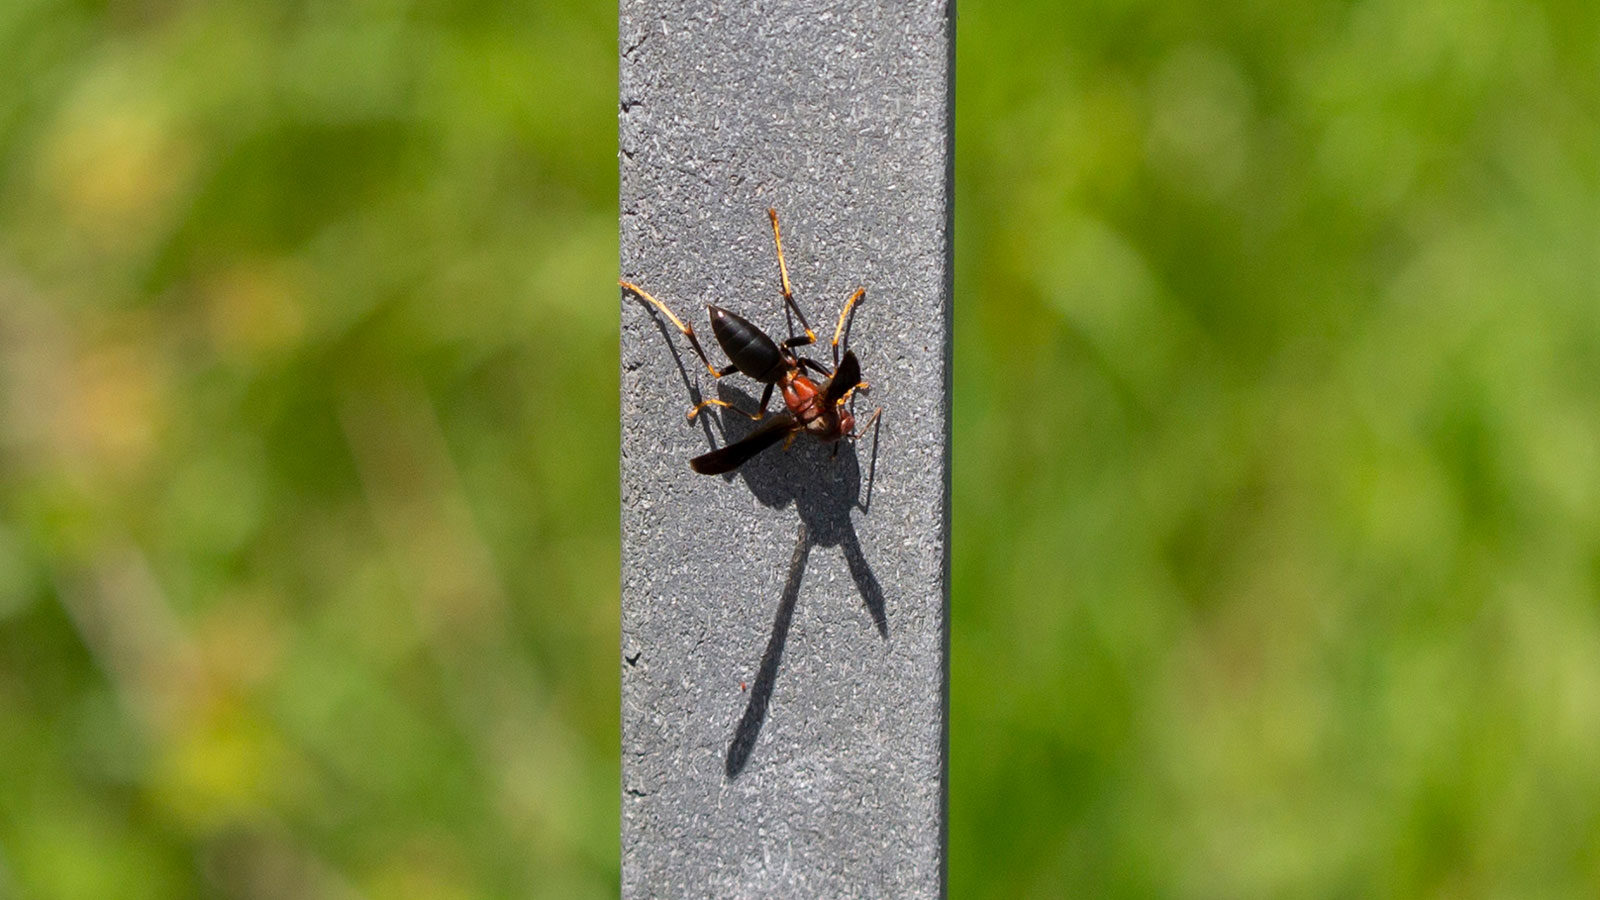 Metric paper wasp on a cement platform